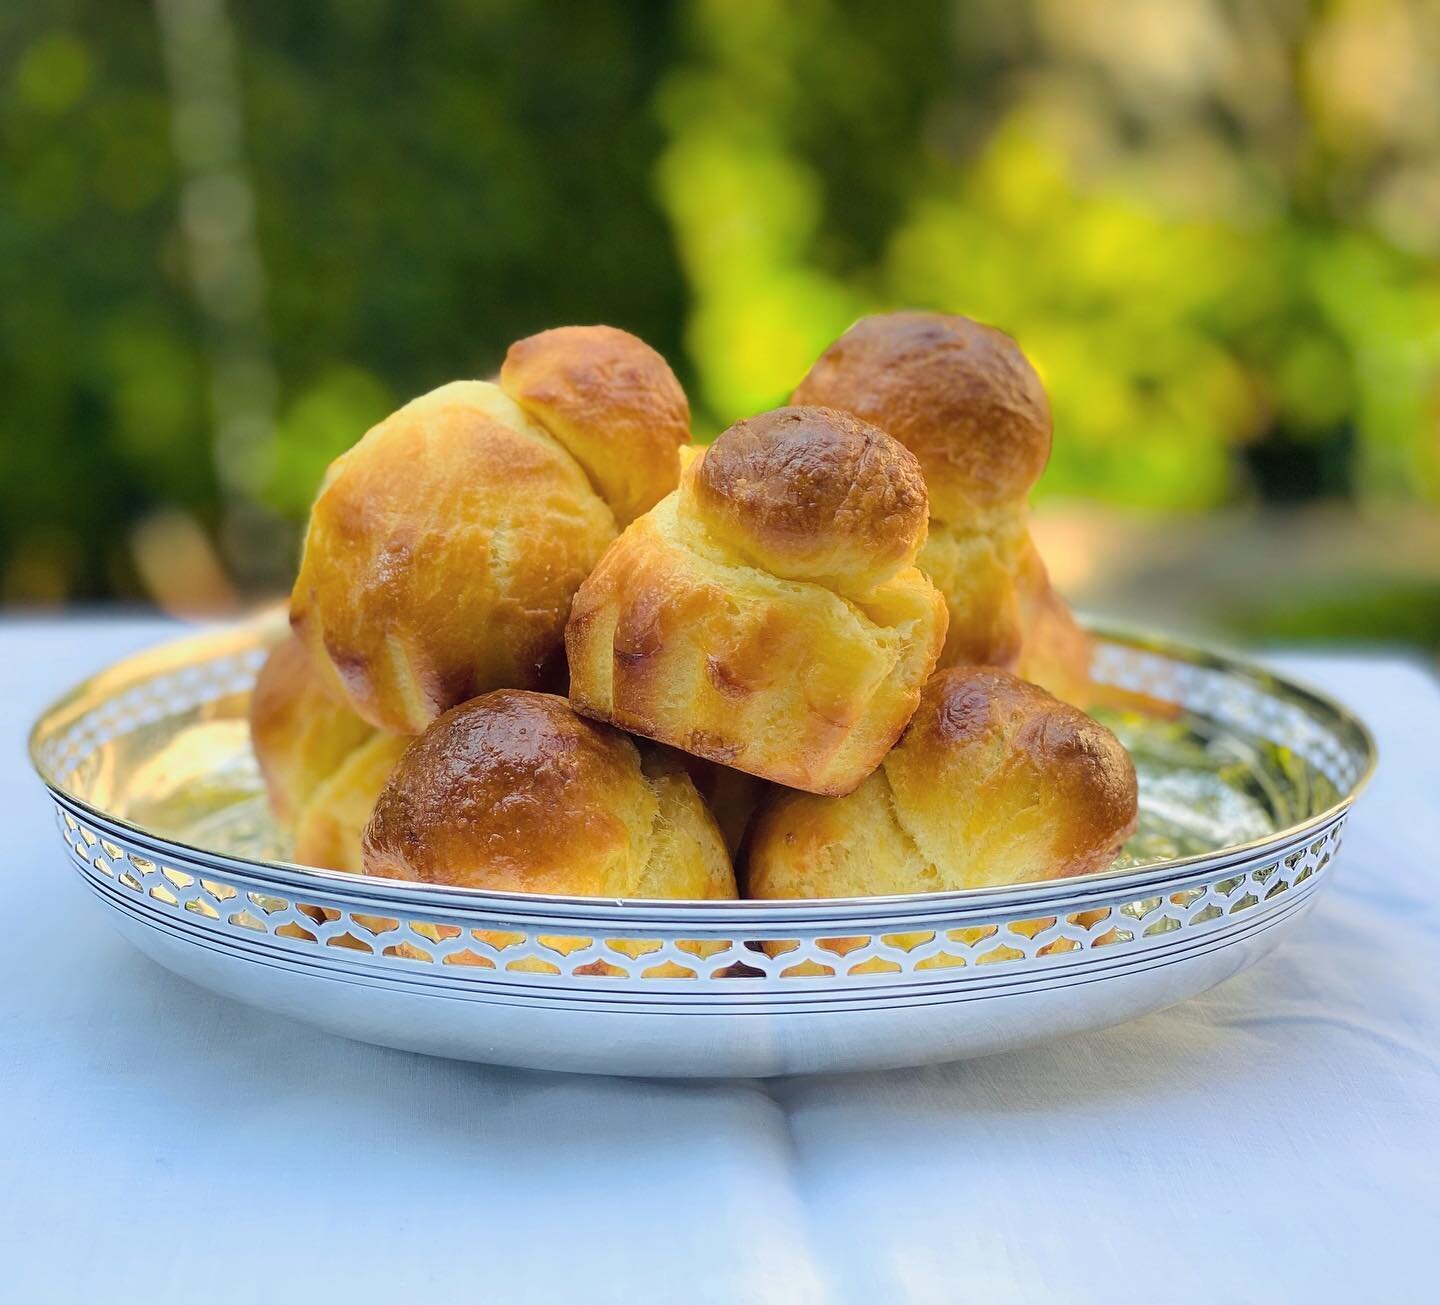 Brioche is not complicated to make - it just takes patience. And someone to share all the fluffy goodness with. (I swear if I have one more of these I&rsquo;m going to explode.)
-
Check the link in our bio to register for our all new Carbs 101 course